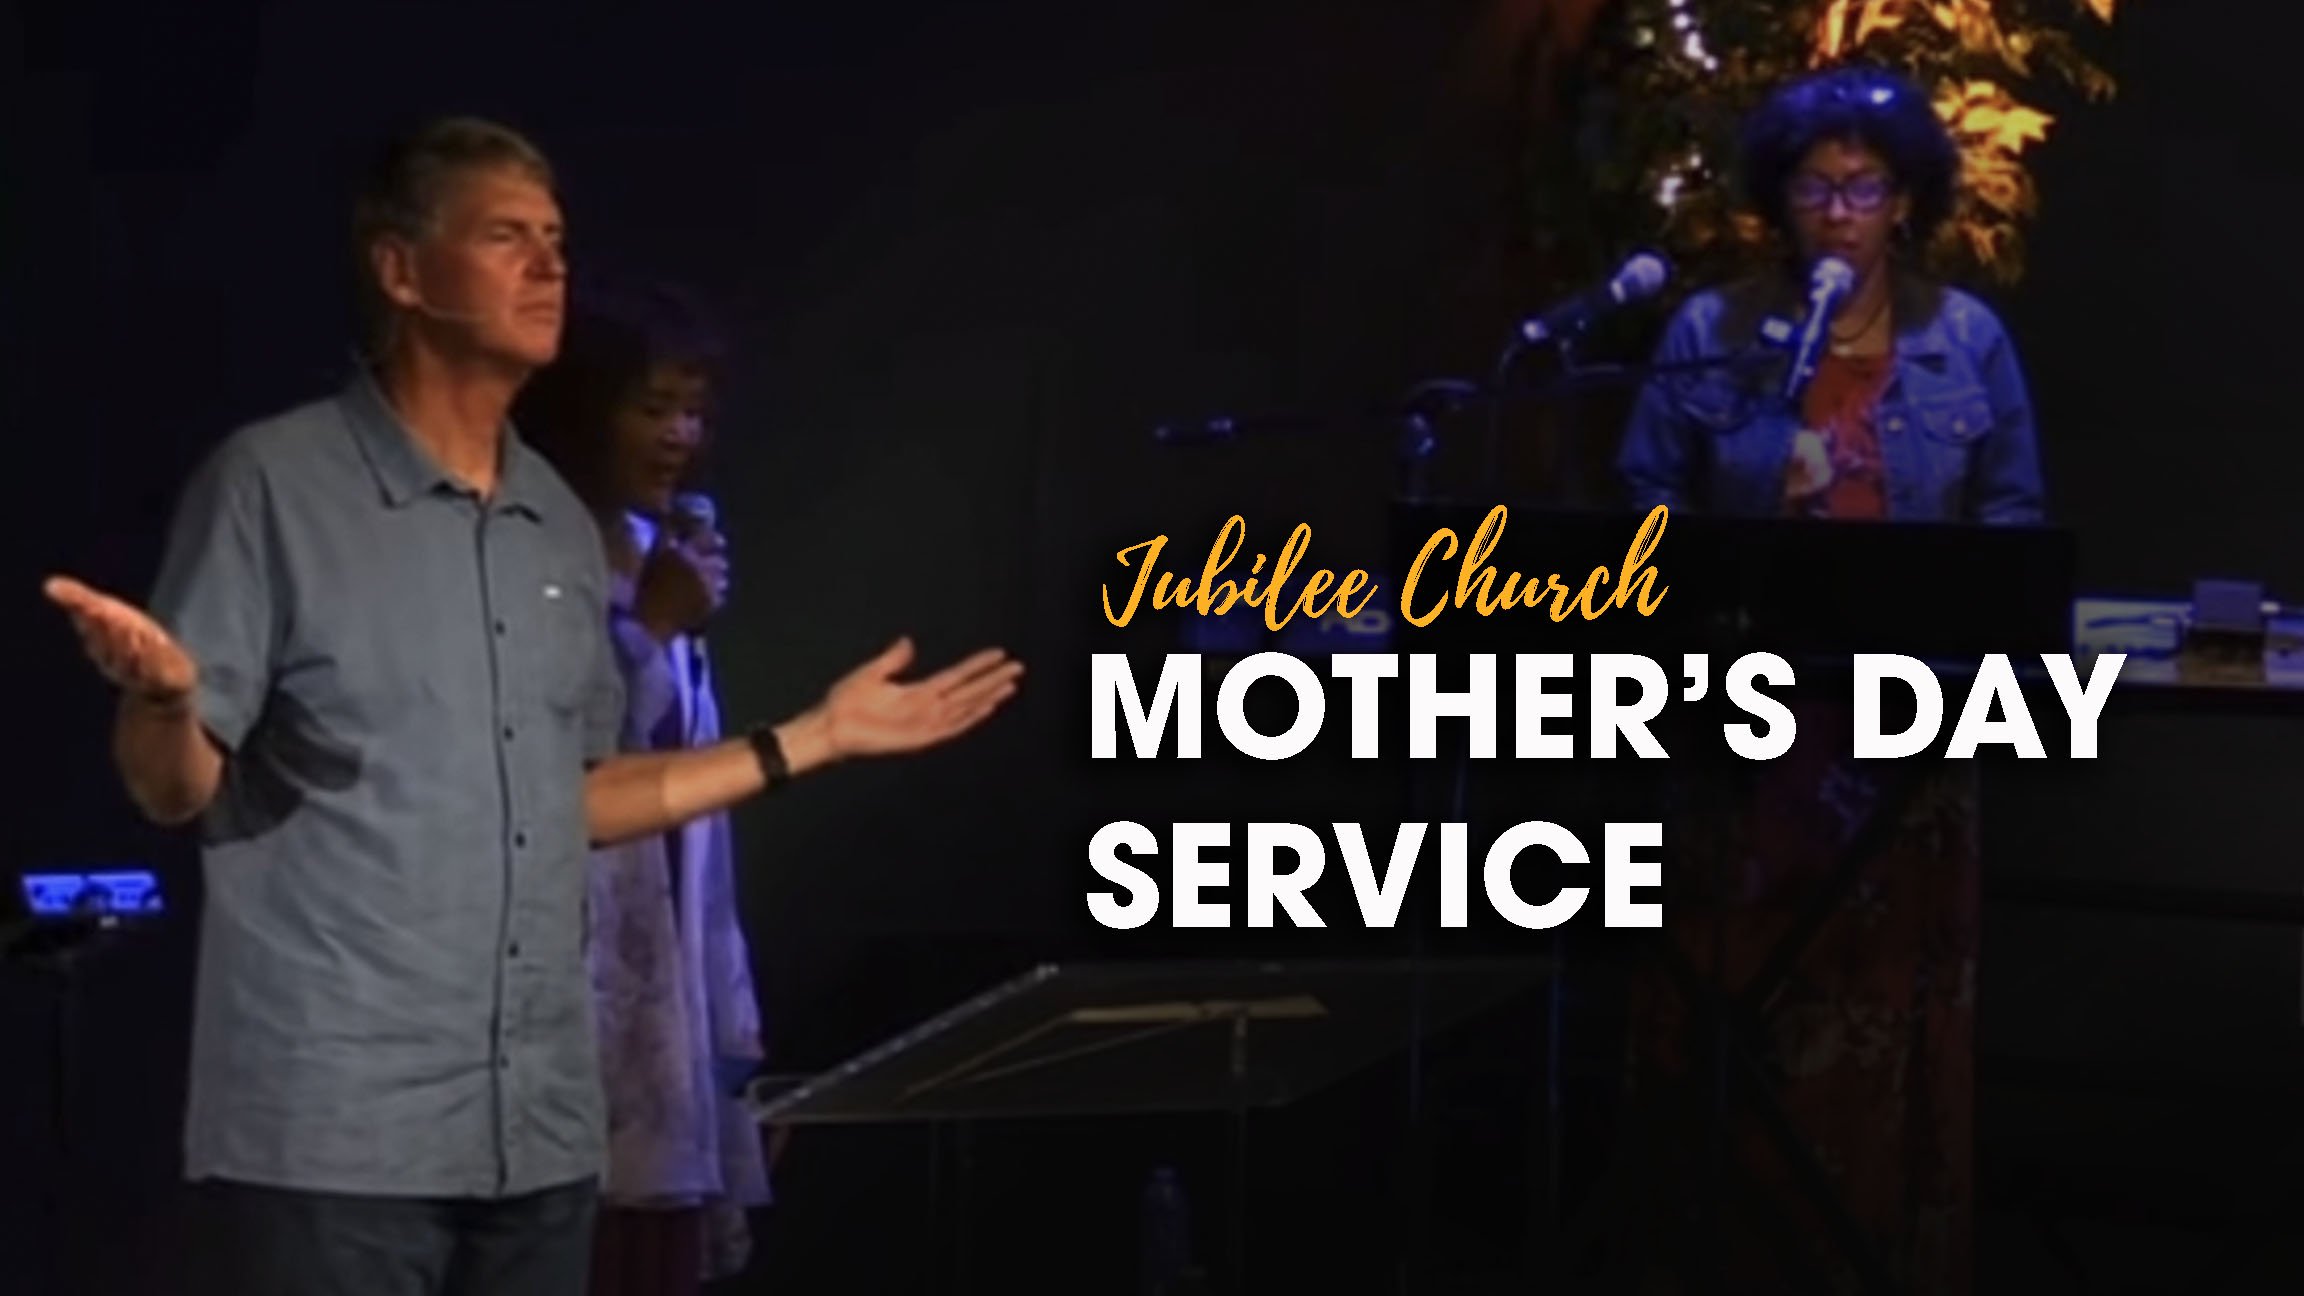 Mother’s Day Worship Service